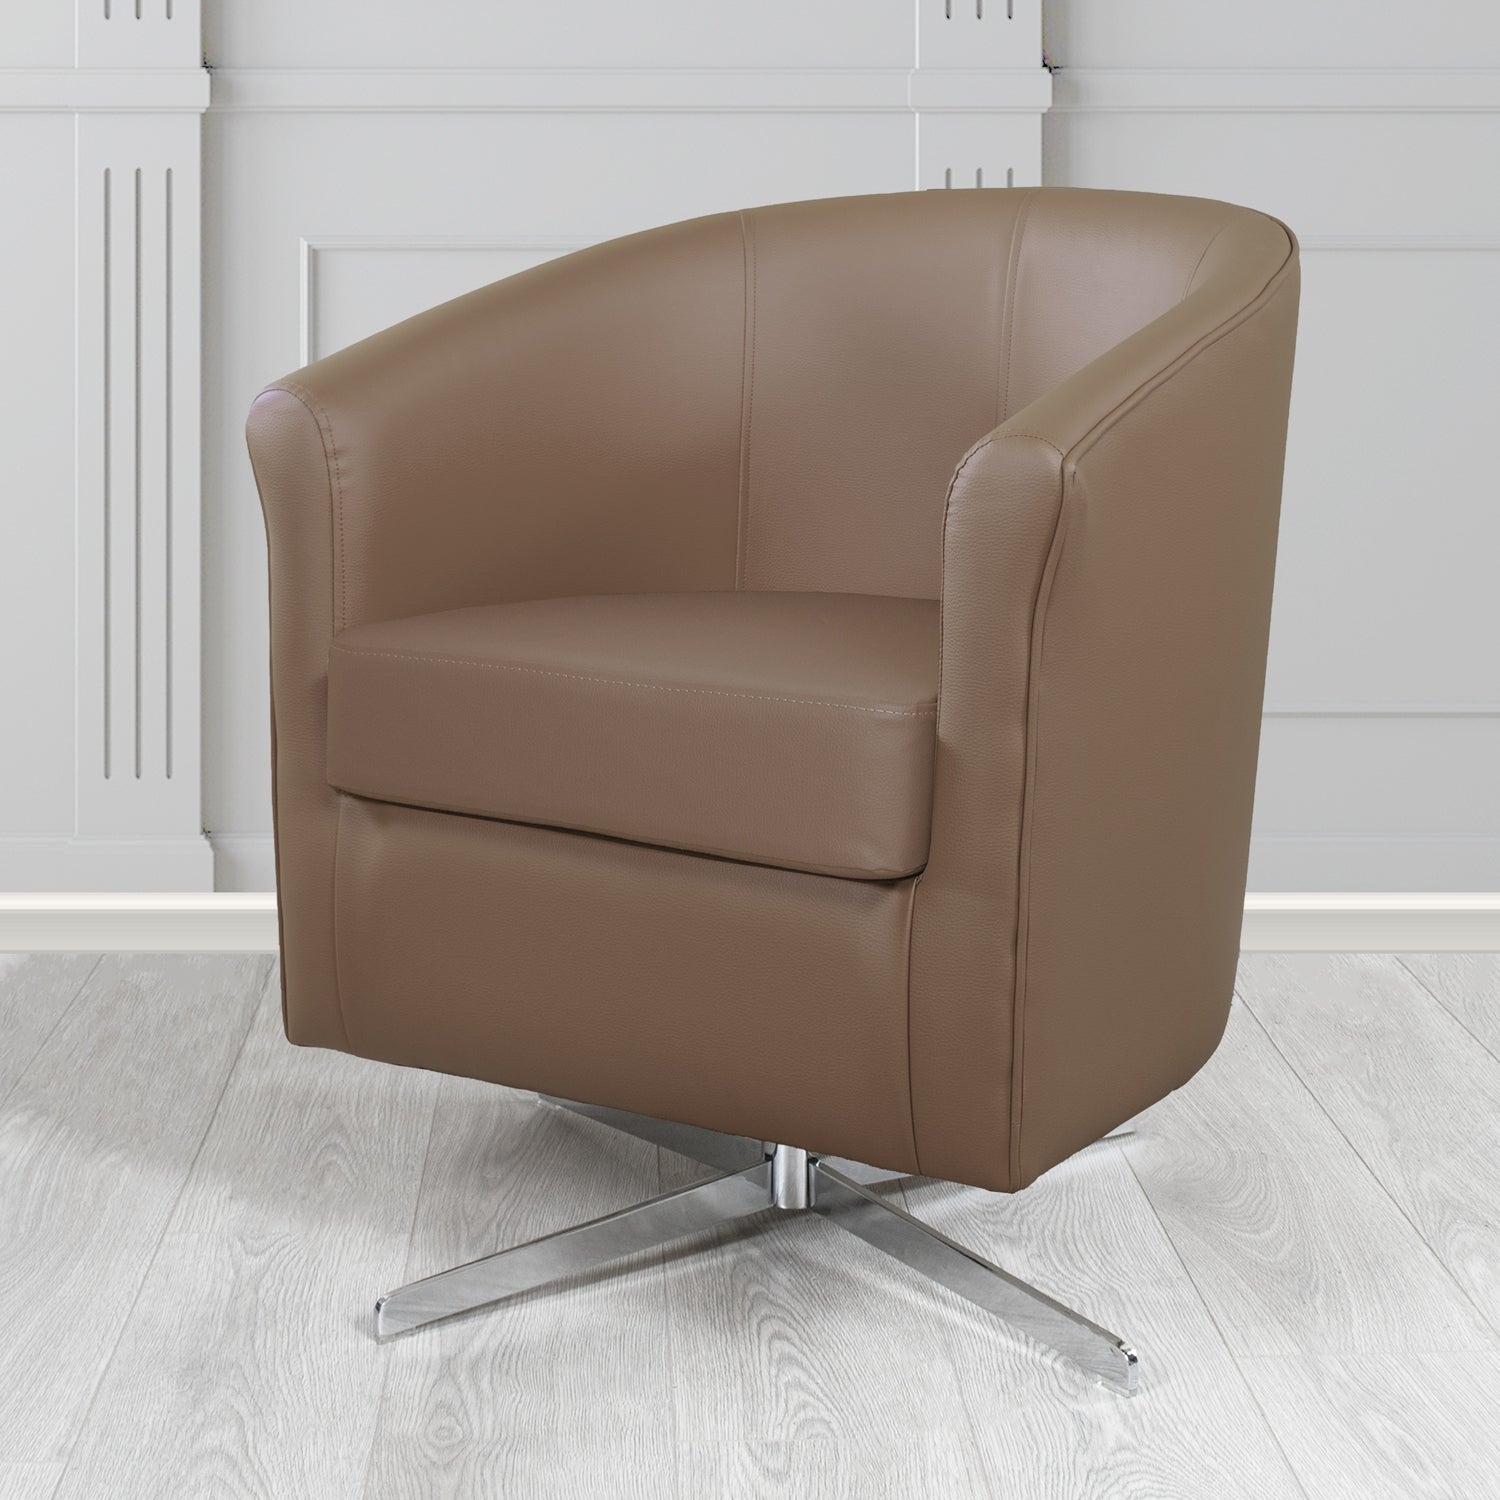 Cannes Swivel Tub Chair in Just Colour Pecan Crib 5 Faux Leather - The Tub Chair Shop